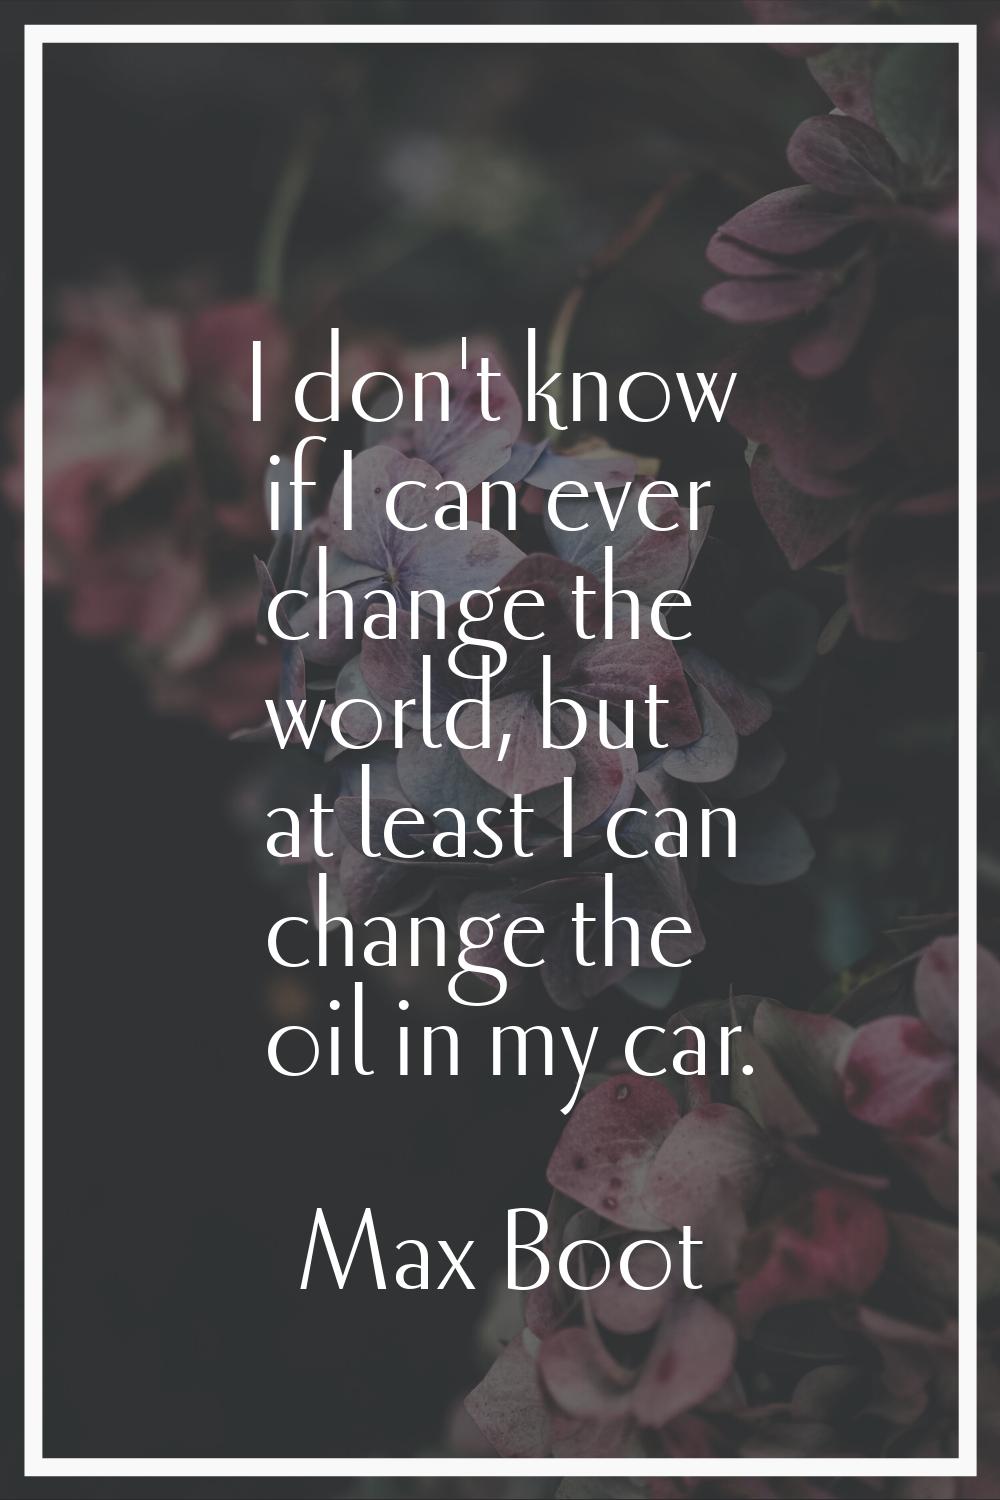 I don't know if I can ever change the world, but at least I can change the oil in my car.